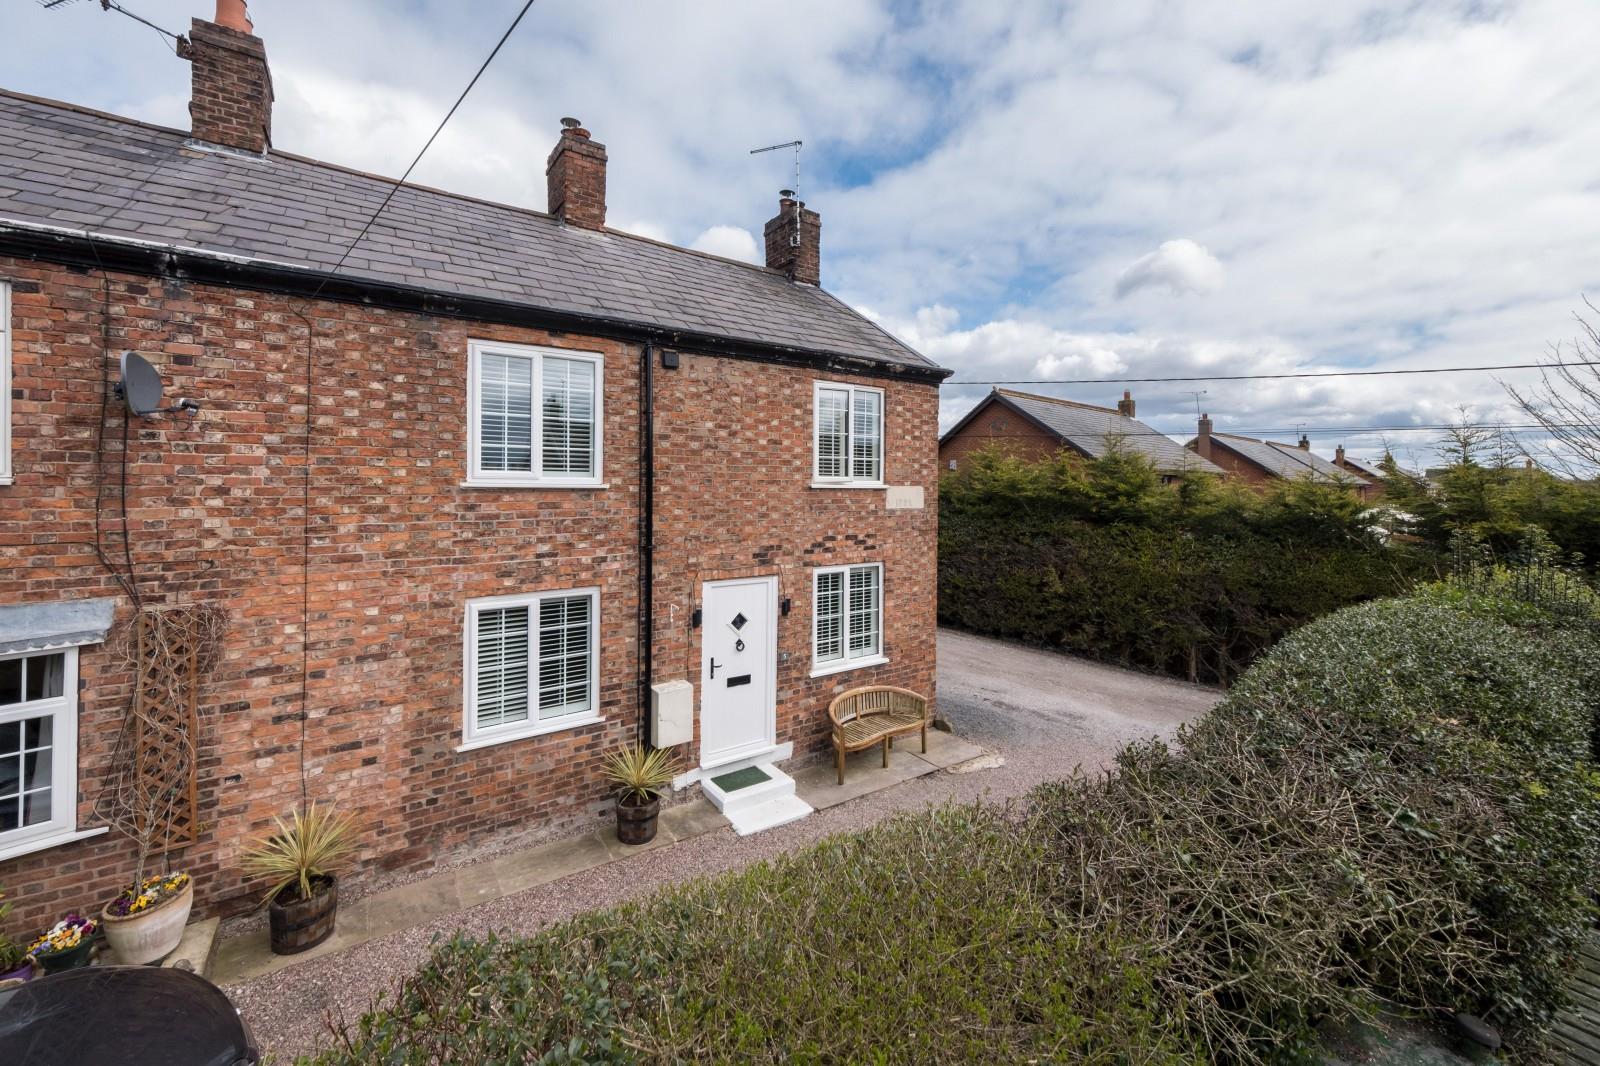 3 bedroom  End Terrace House for Sale in Calveley